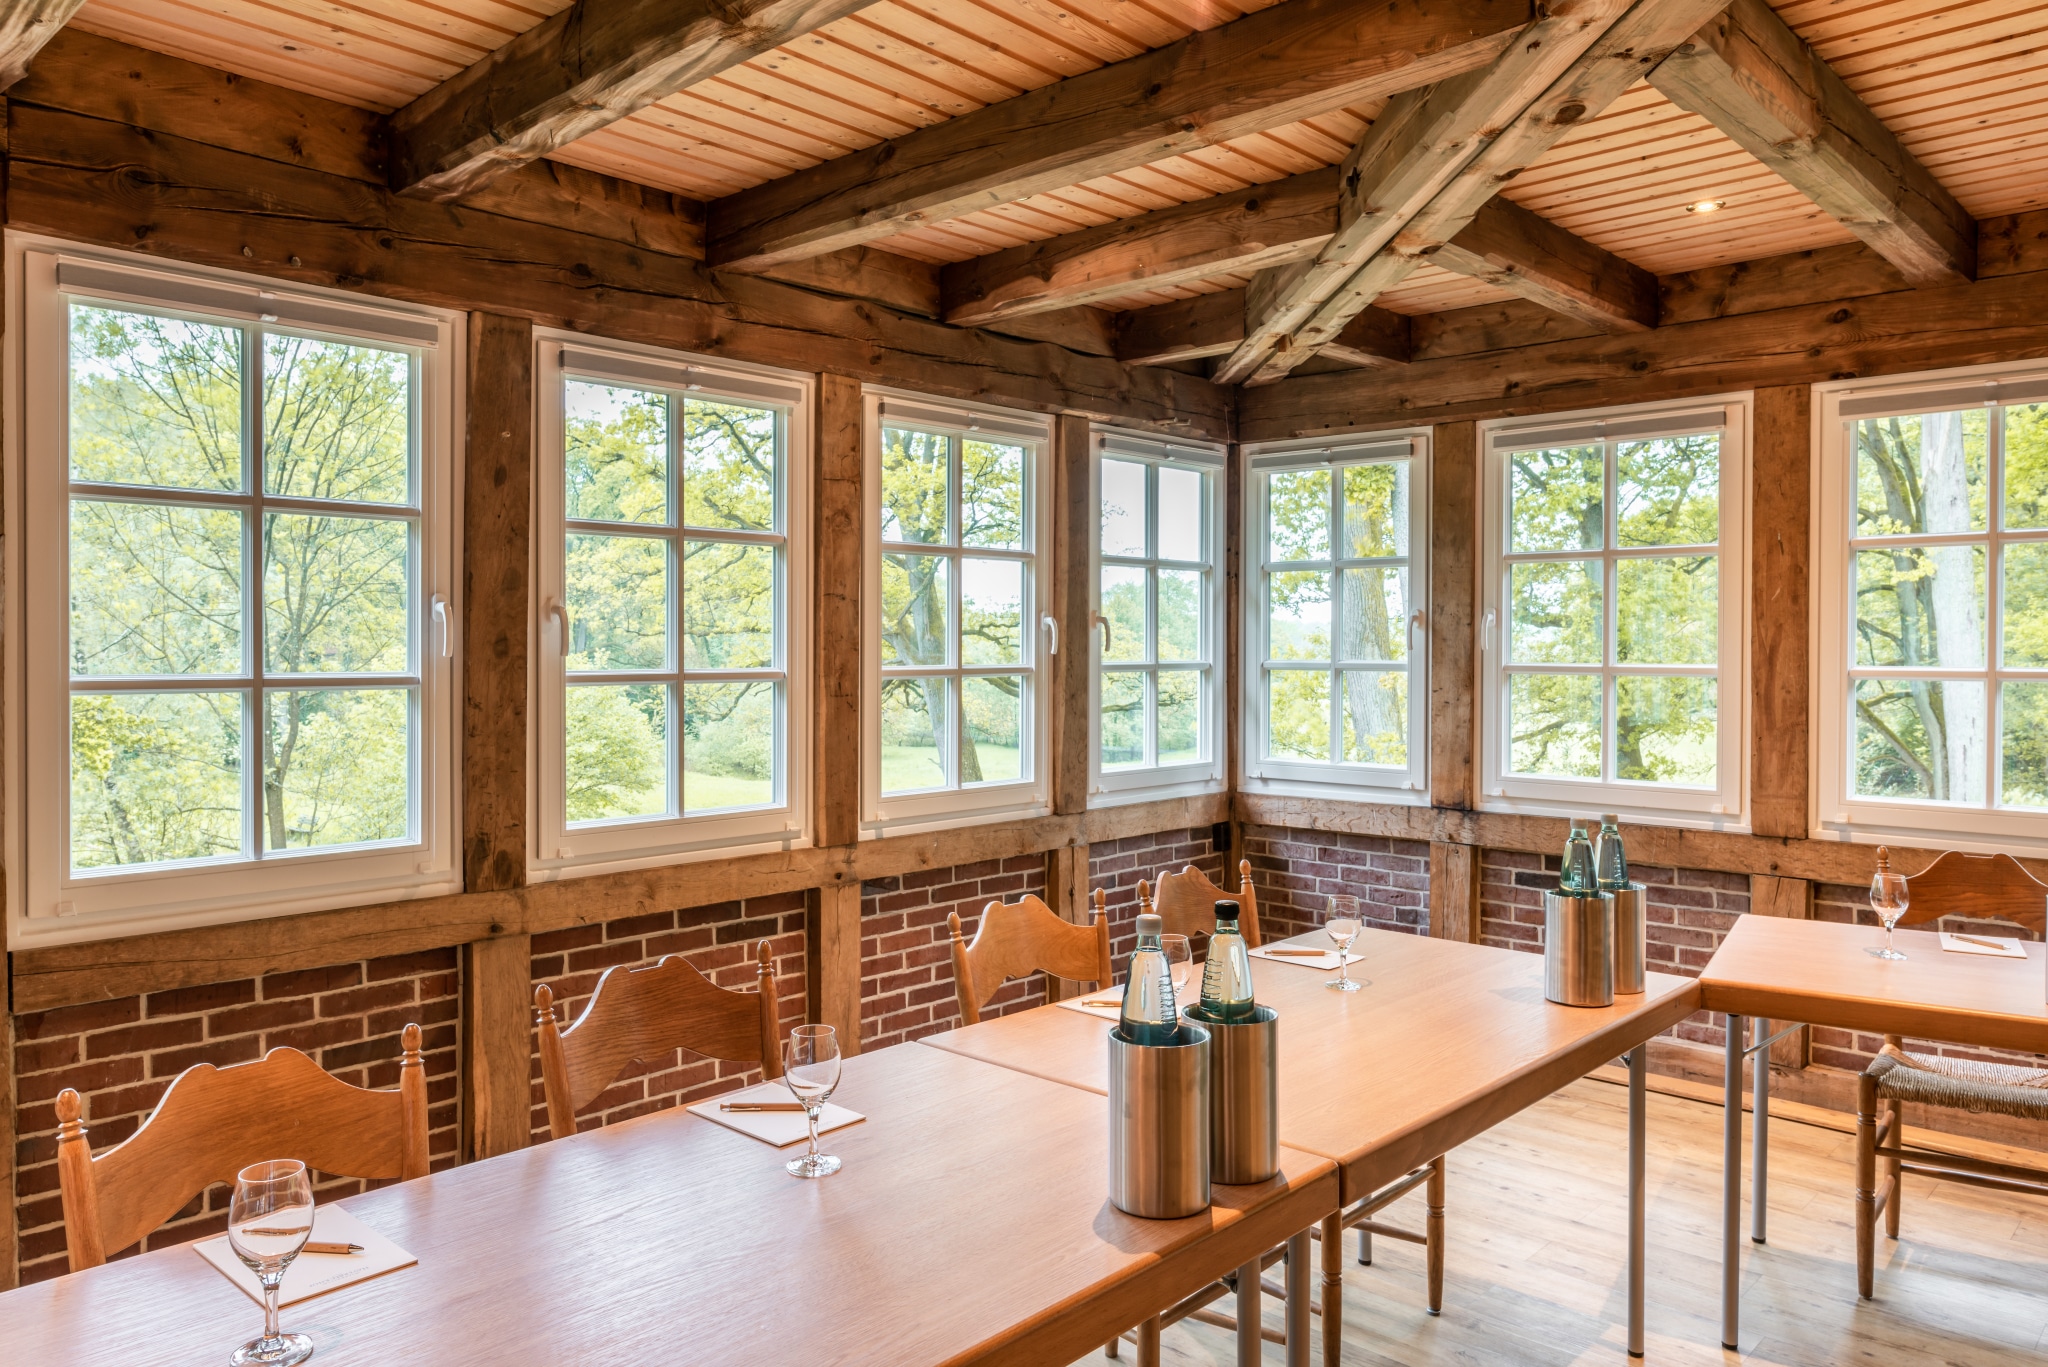 Focused meetings in a rustic atmosphere with a view of nature at Landhaus Haverbeckhof | Photo: Markus Tiemann